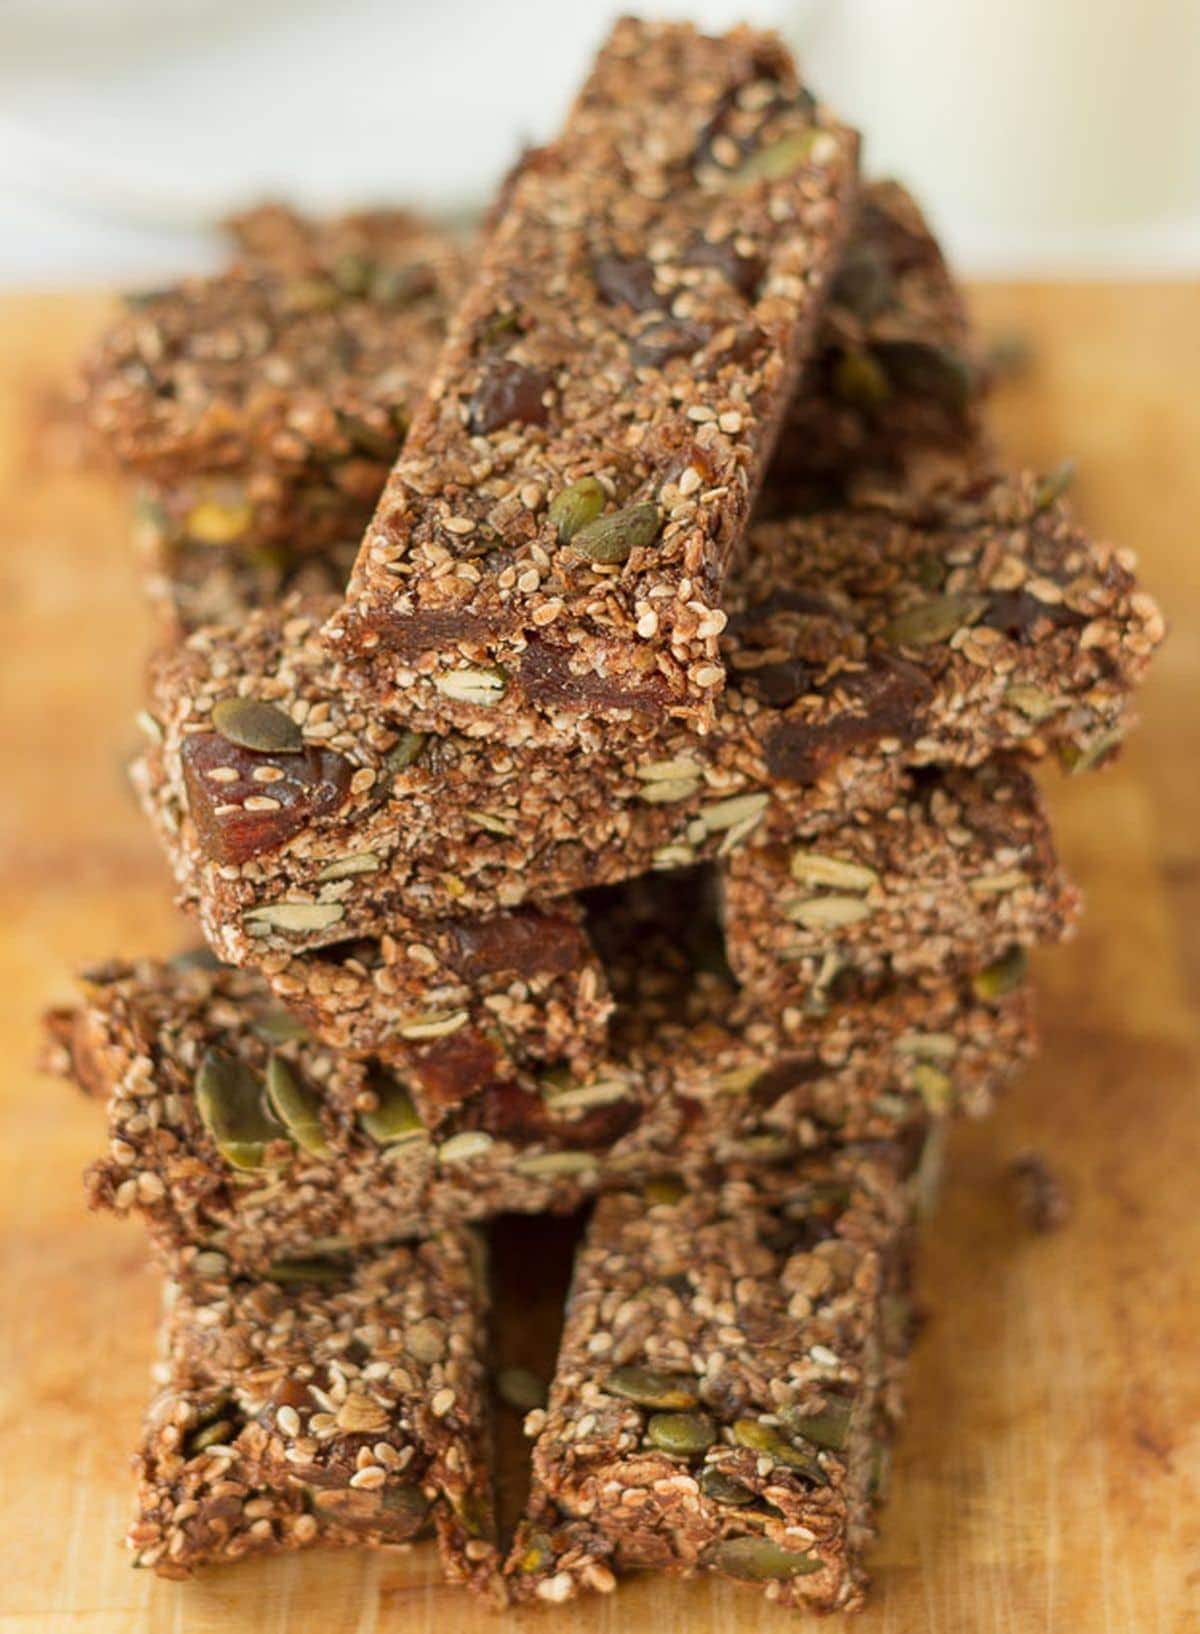 No bake breakfast granola bars stacked one on top of each other on a wooden chopping board.